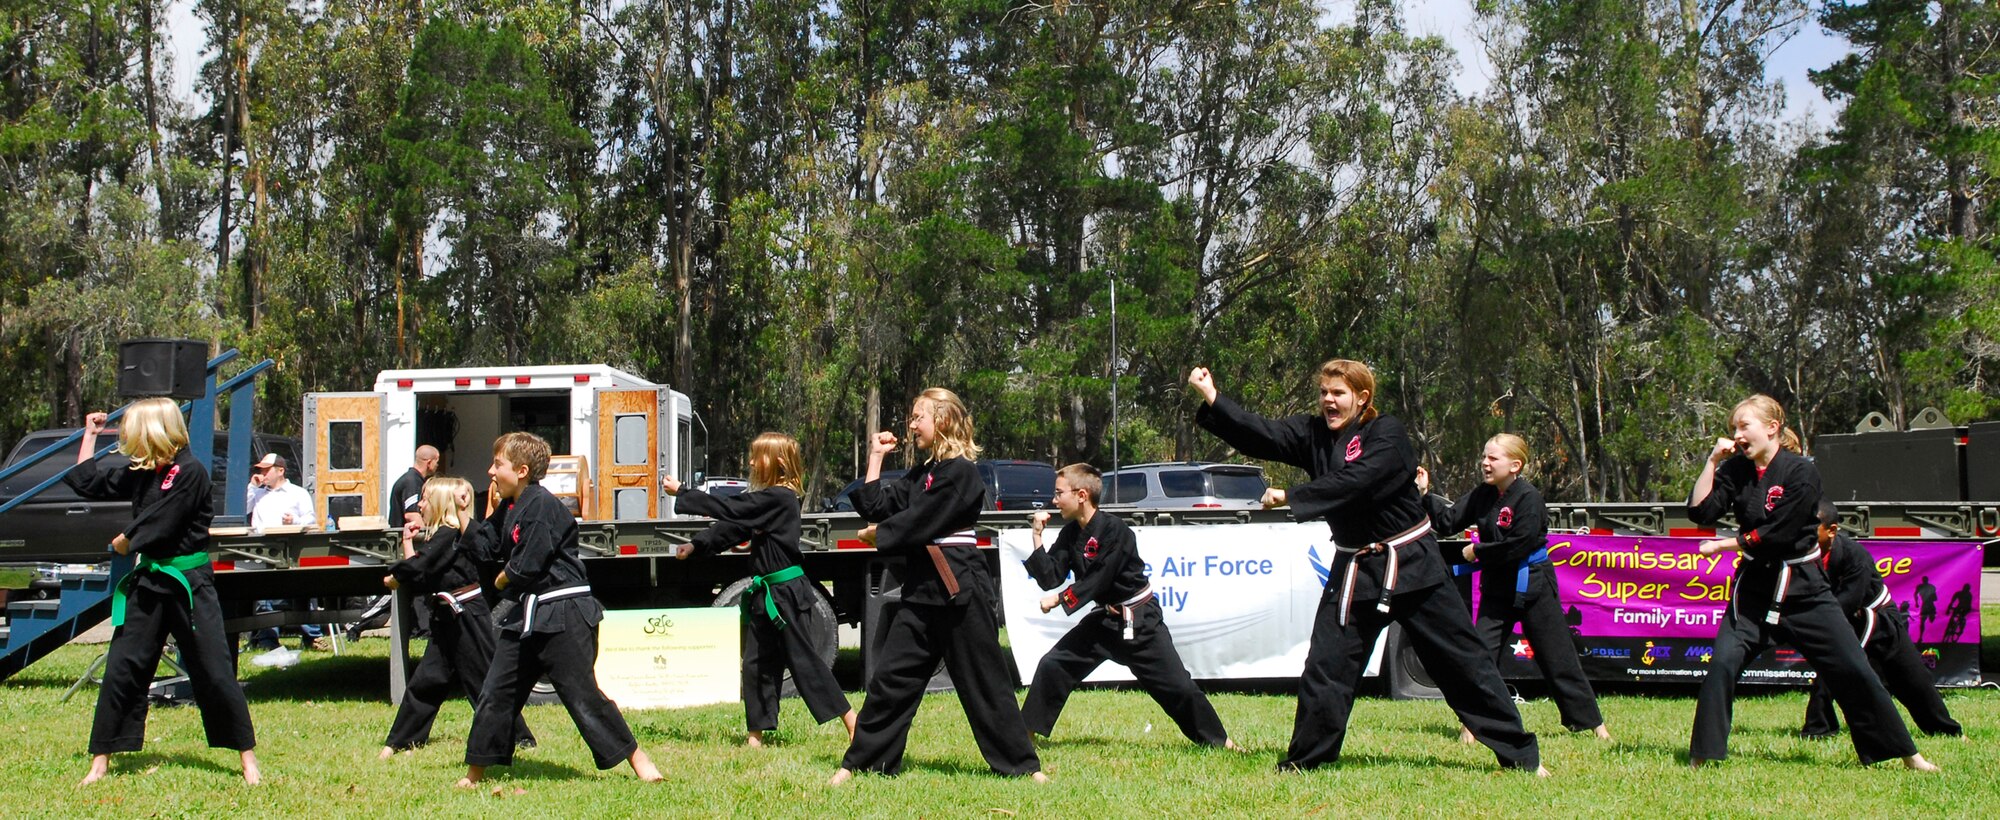 VANDENBERG AIR FORCE BASE, Calif. --  The Universal Kempo Karate Vandenberg Branch demonstrated their belief that defense is the best offense shown by during the Team Vandenberg Kids' Carnival at Cocheo Park here Saturday, April 24, 2010.  The carnival was aimed to promote healthy families and community with games and attractions.  (U.S. Air Force photo/Senior Airman Andrew Satran) 

 

 
 

 

 

 
 

 